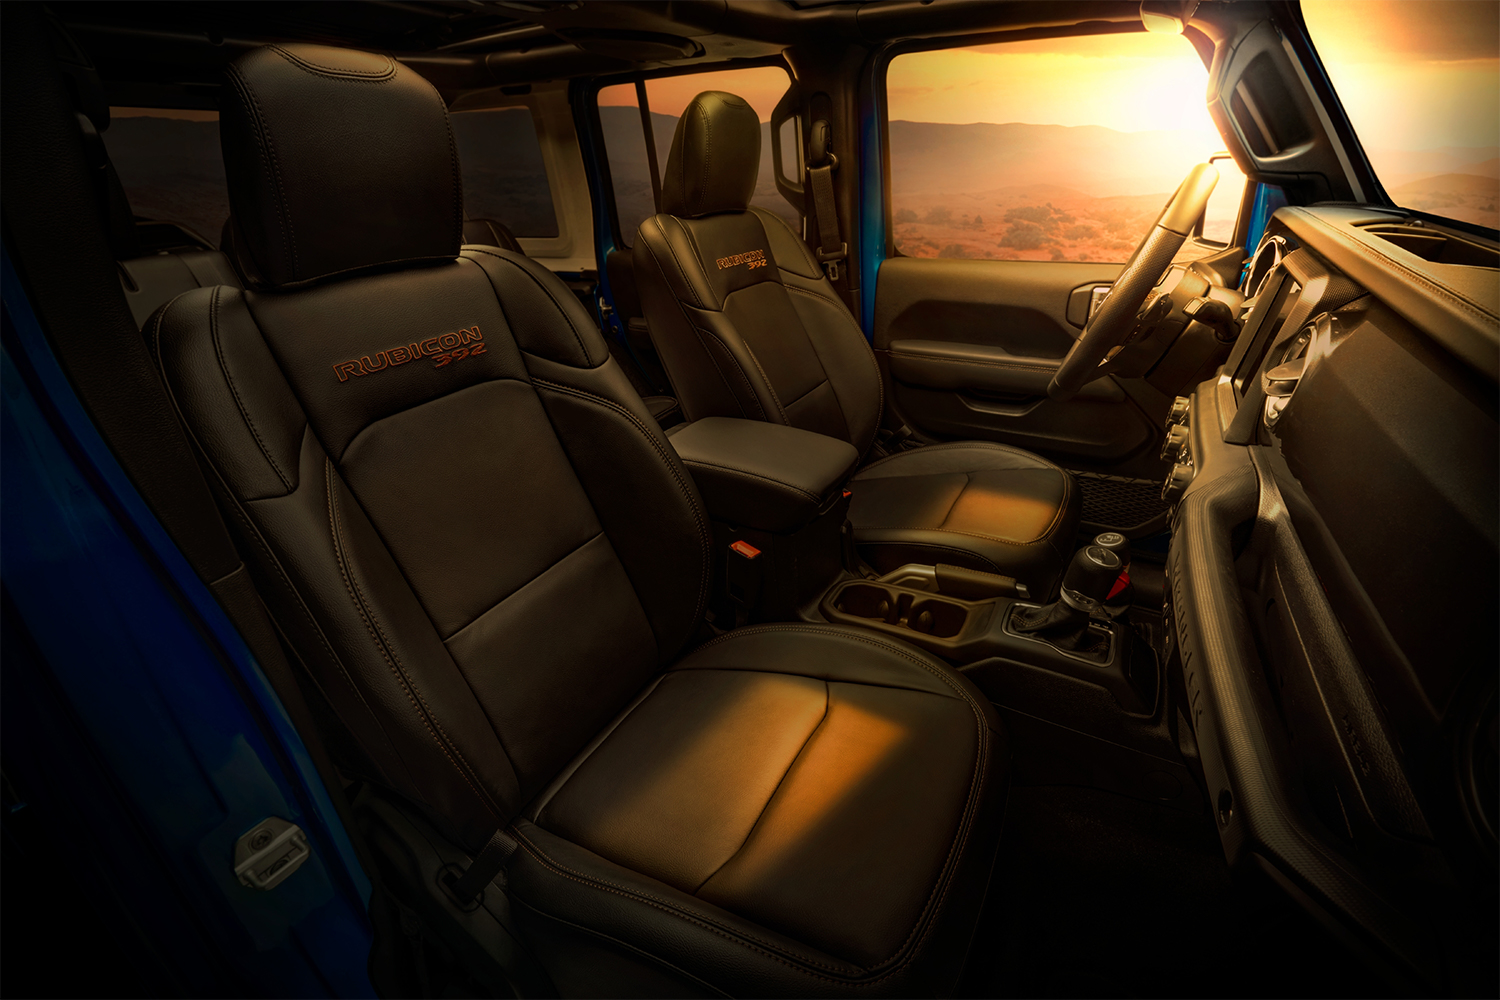 The front two seats of the 2022 Jeep Wrangler Rubicon 392, an off-road SUV with a V8 engine